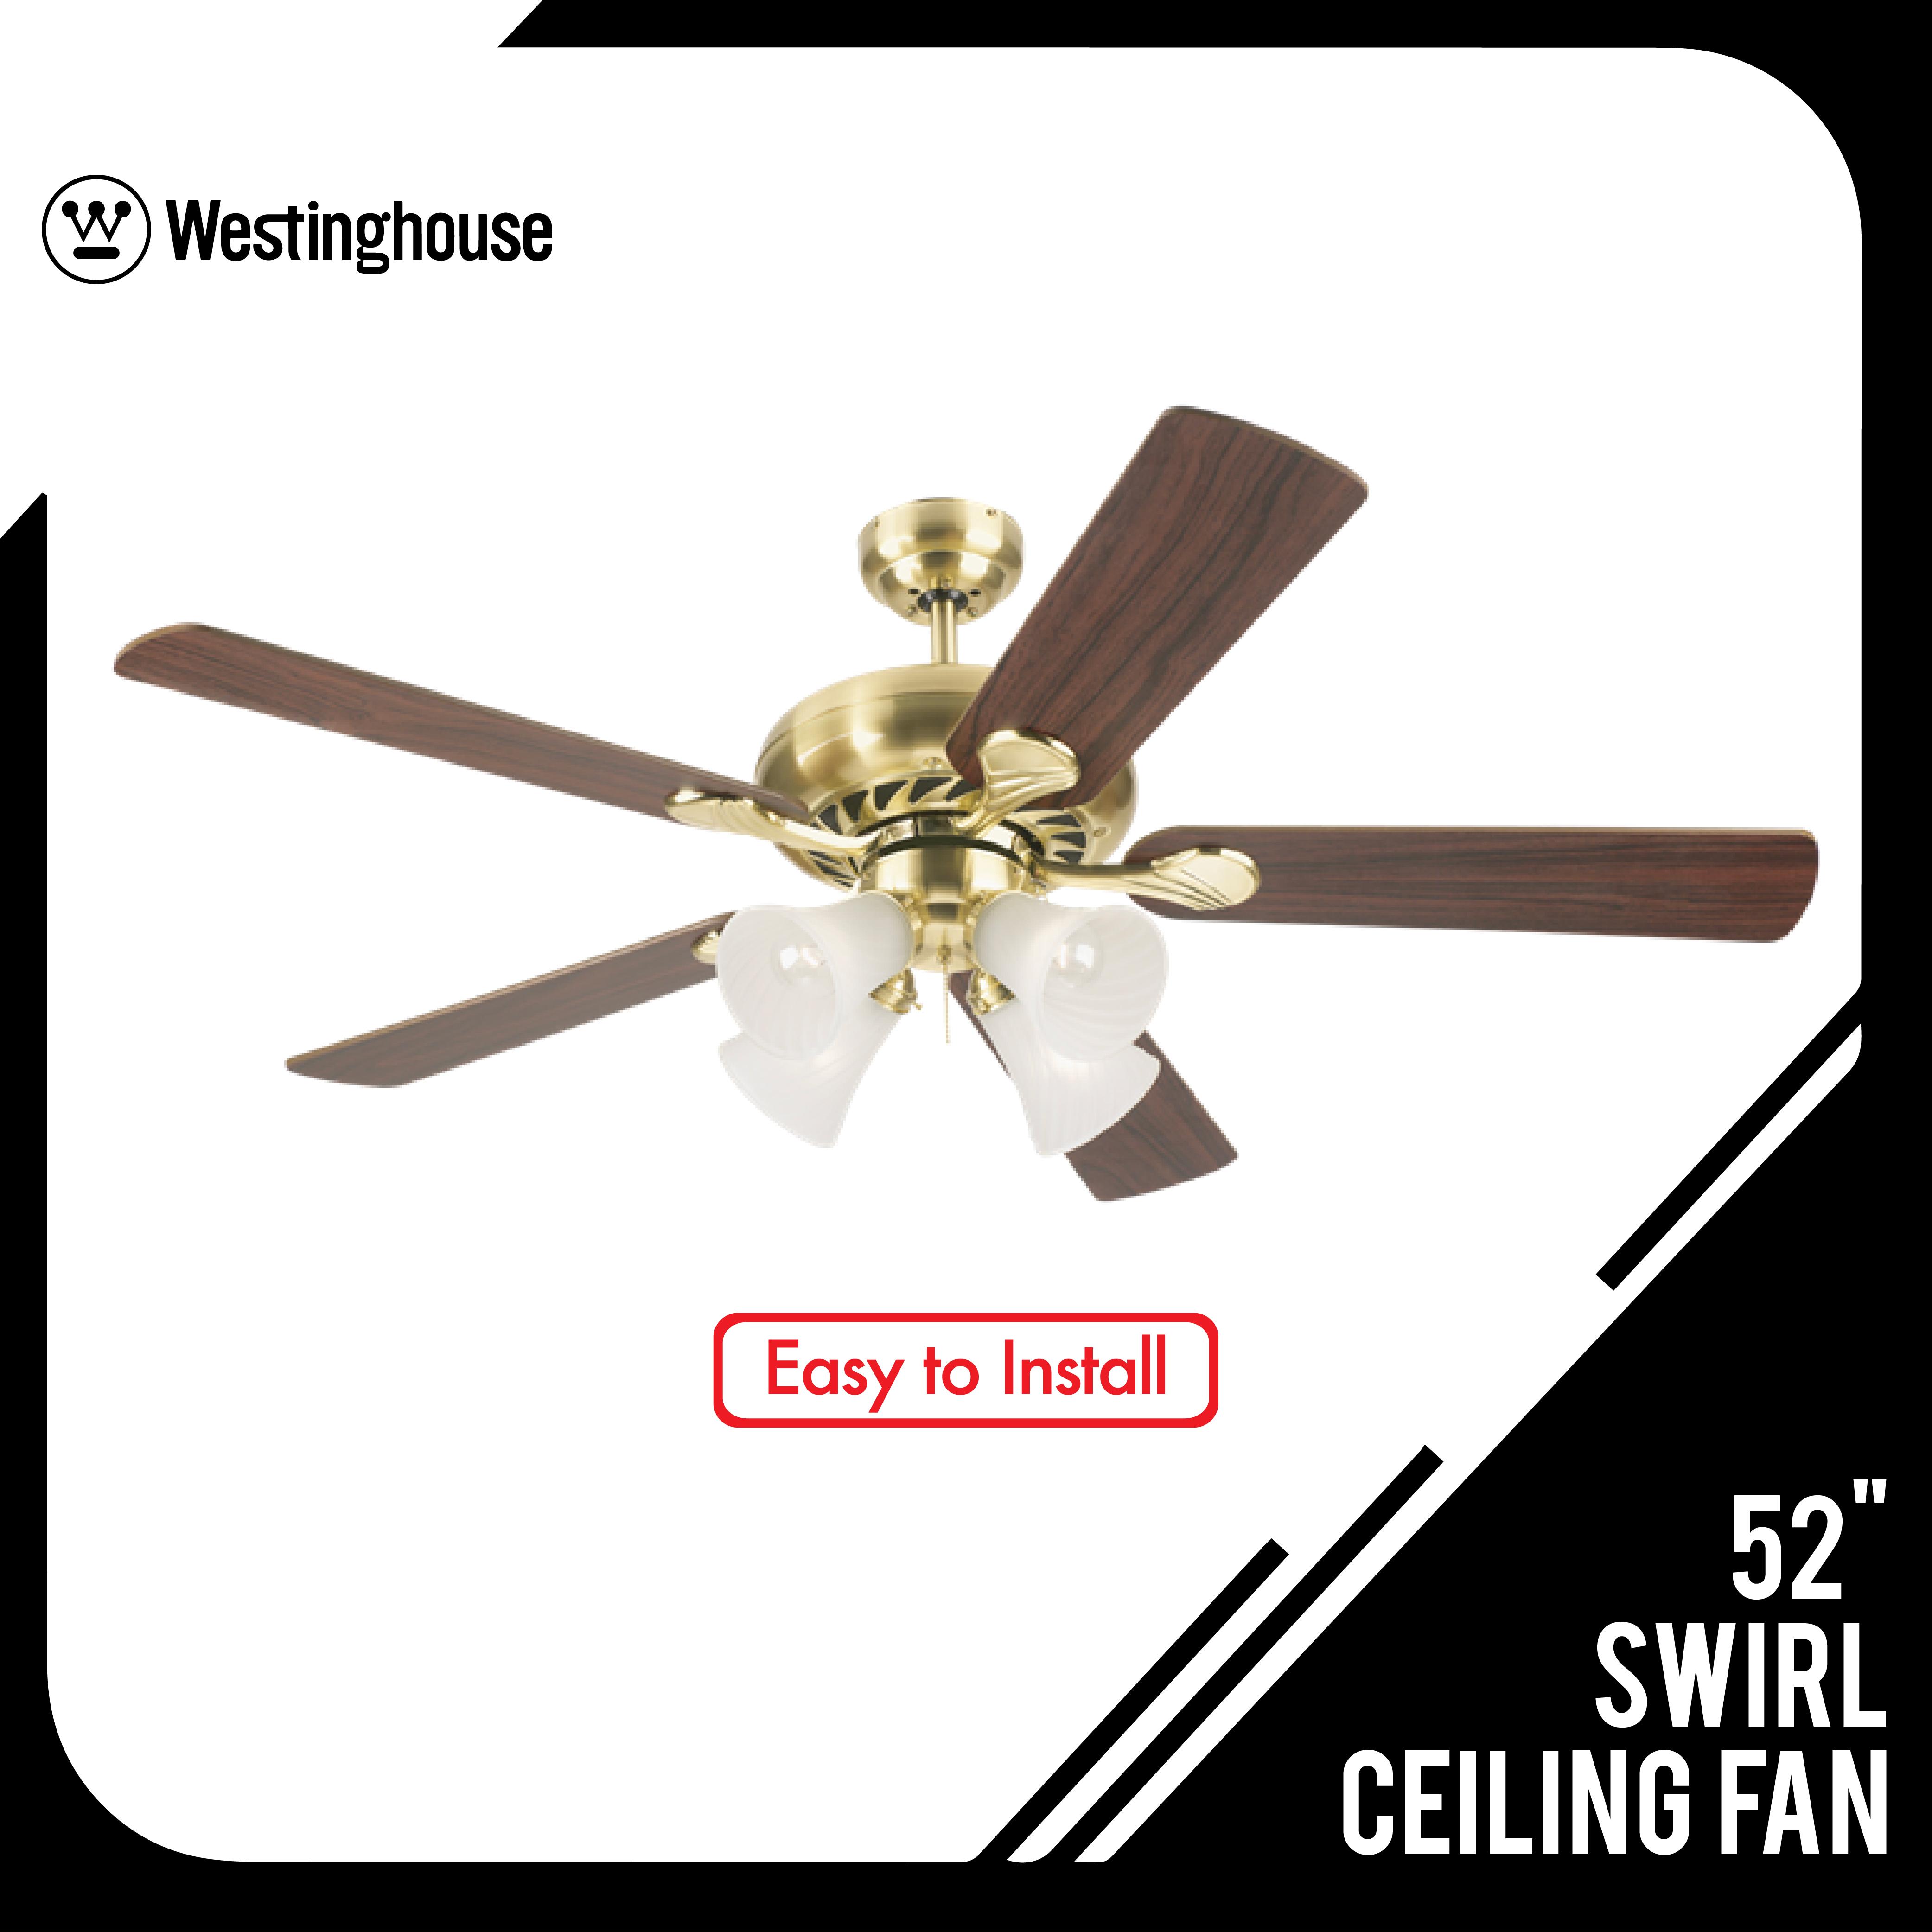 Westinghouse 52 Swirl Ceiling Fan 78078 Satin Brass With 2 Pull Chain Switch One To Turn Off Lights The Other To Control Blade Speed Modern